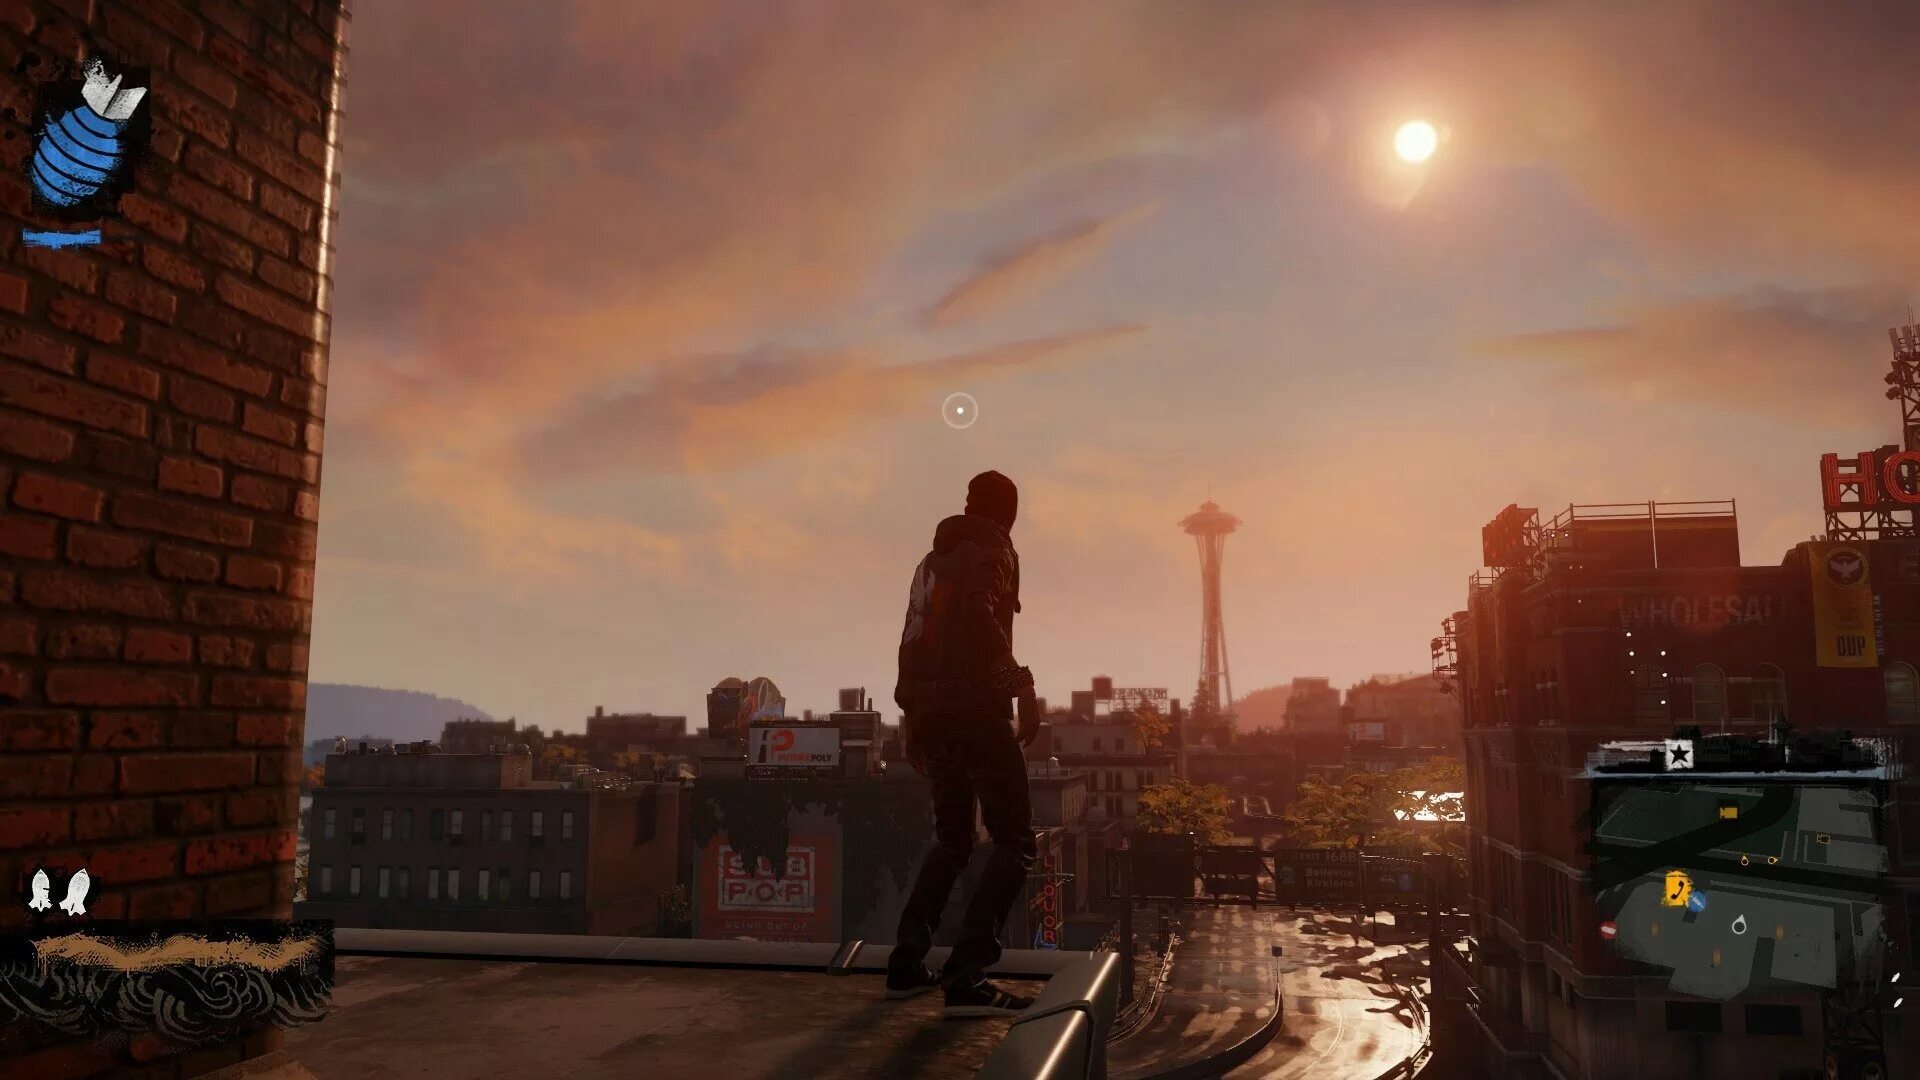 Игра second son. Infamous second son Gameplay. Second son геймплей. Second son Gameplay. Infamous second son геймплей.